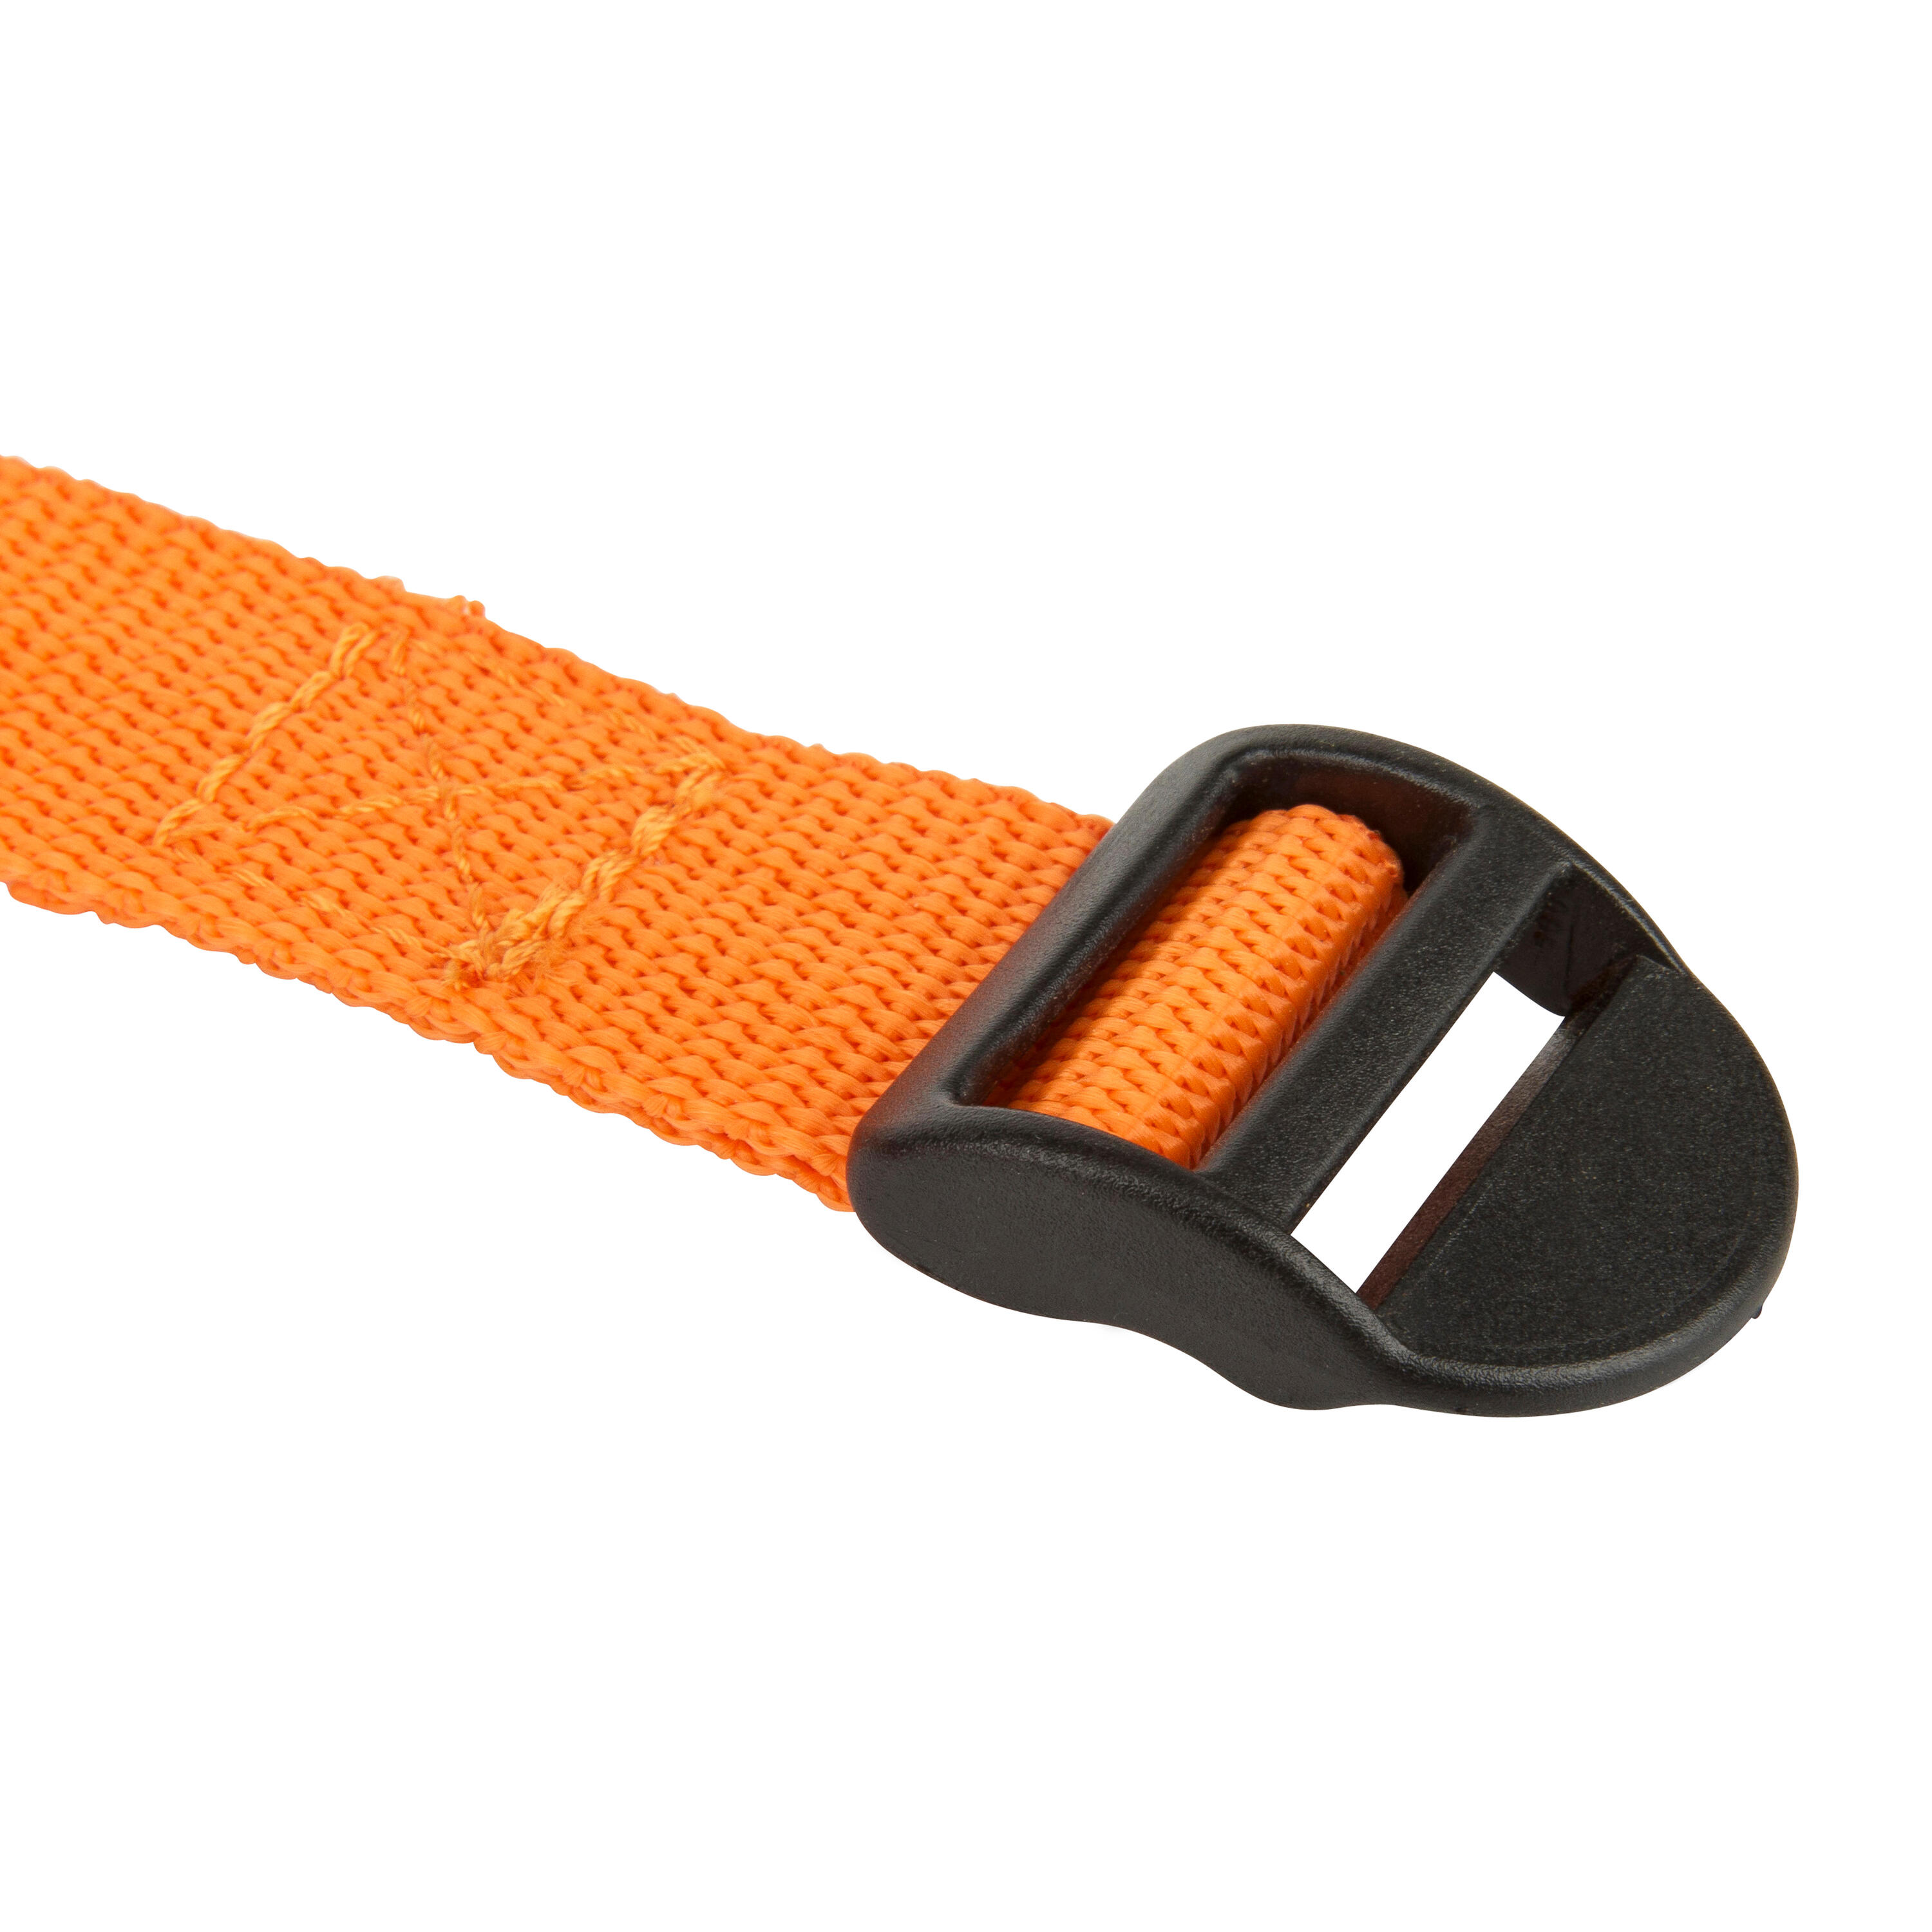 FASTENING STRAP FOR ITIWIT X500 INFLATABLE KAYAK CARRY BAG 3/4